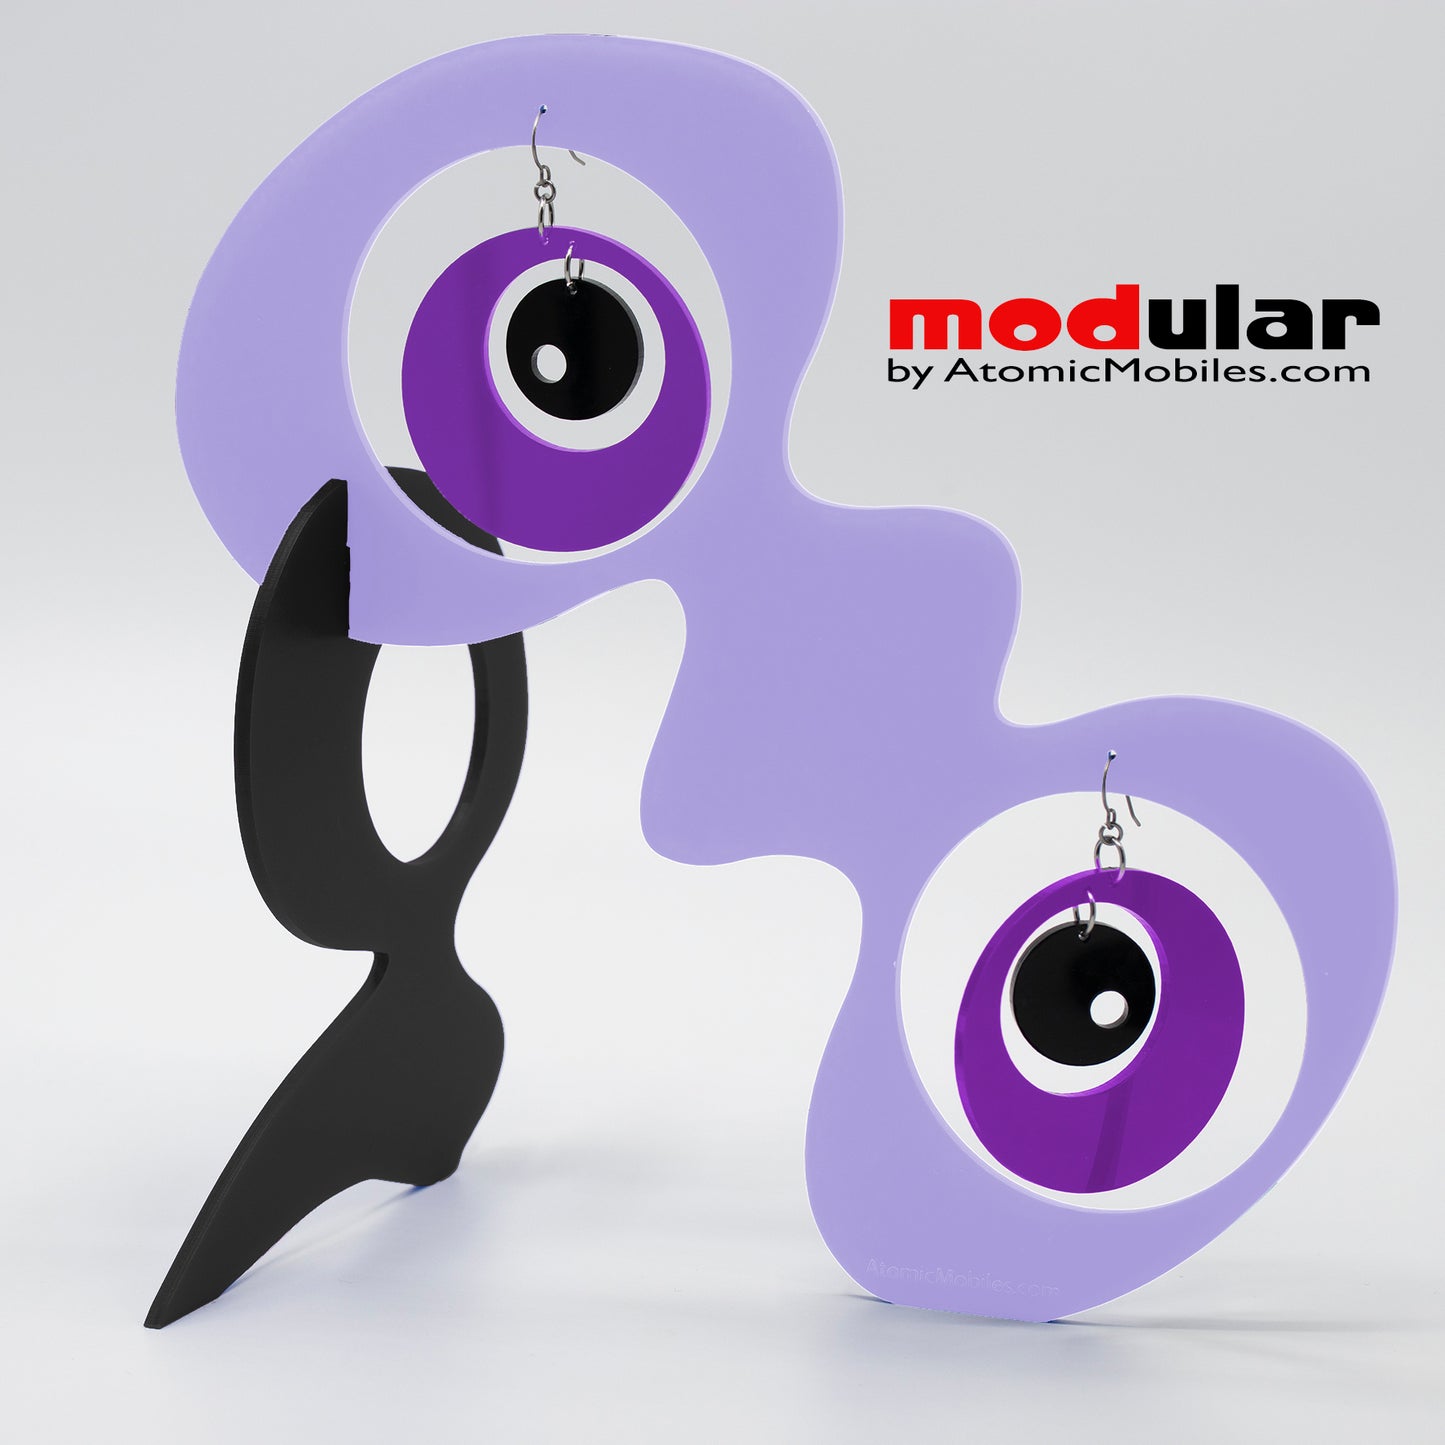 Handmade Groovy style earrings and stabile kinetic modern art sculpture in Lavender Black and Purple by AtomicMobiles.com